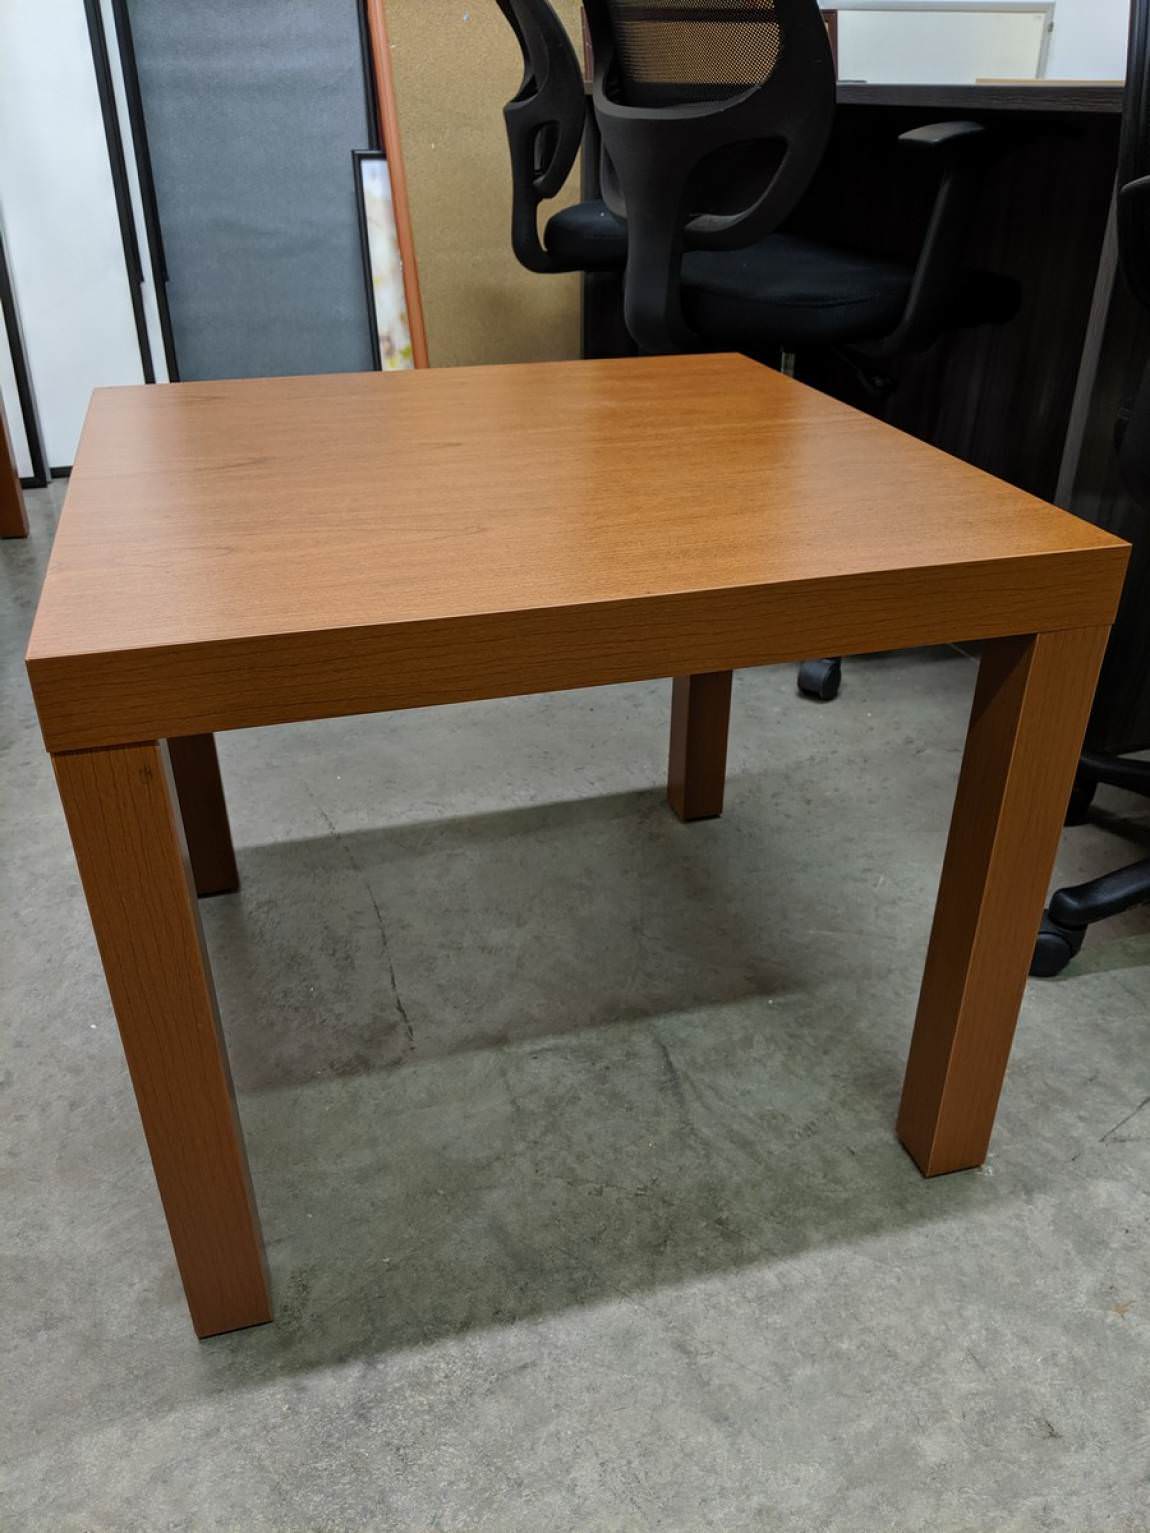 Cherry Laminate End Table – 24x24